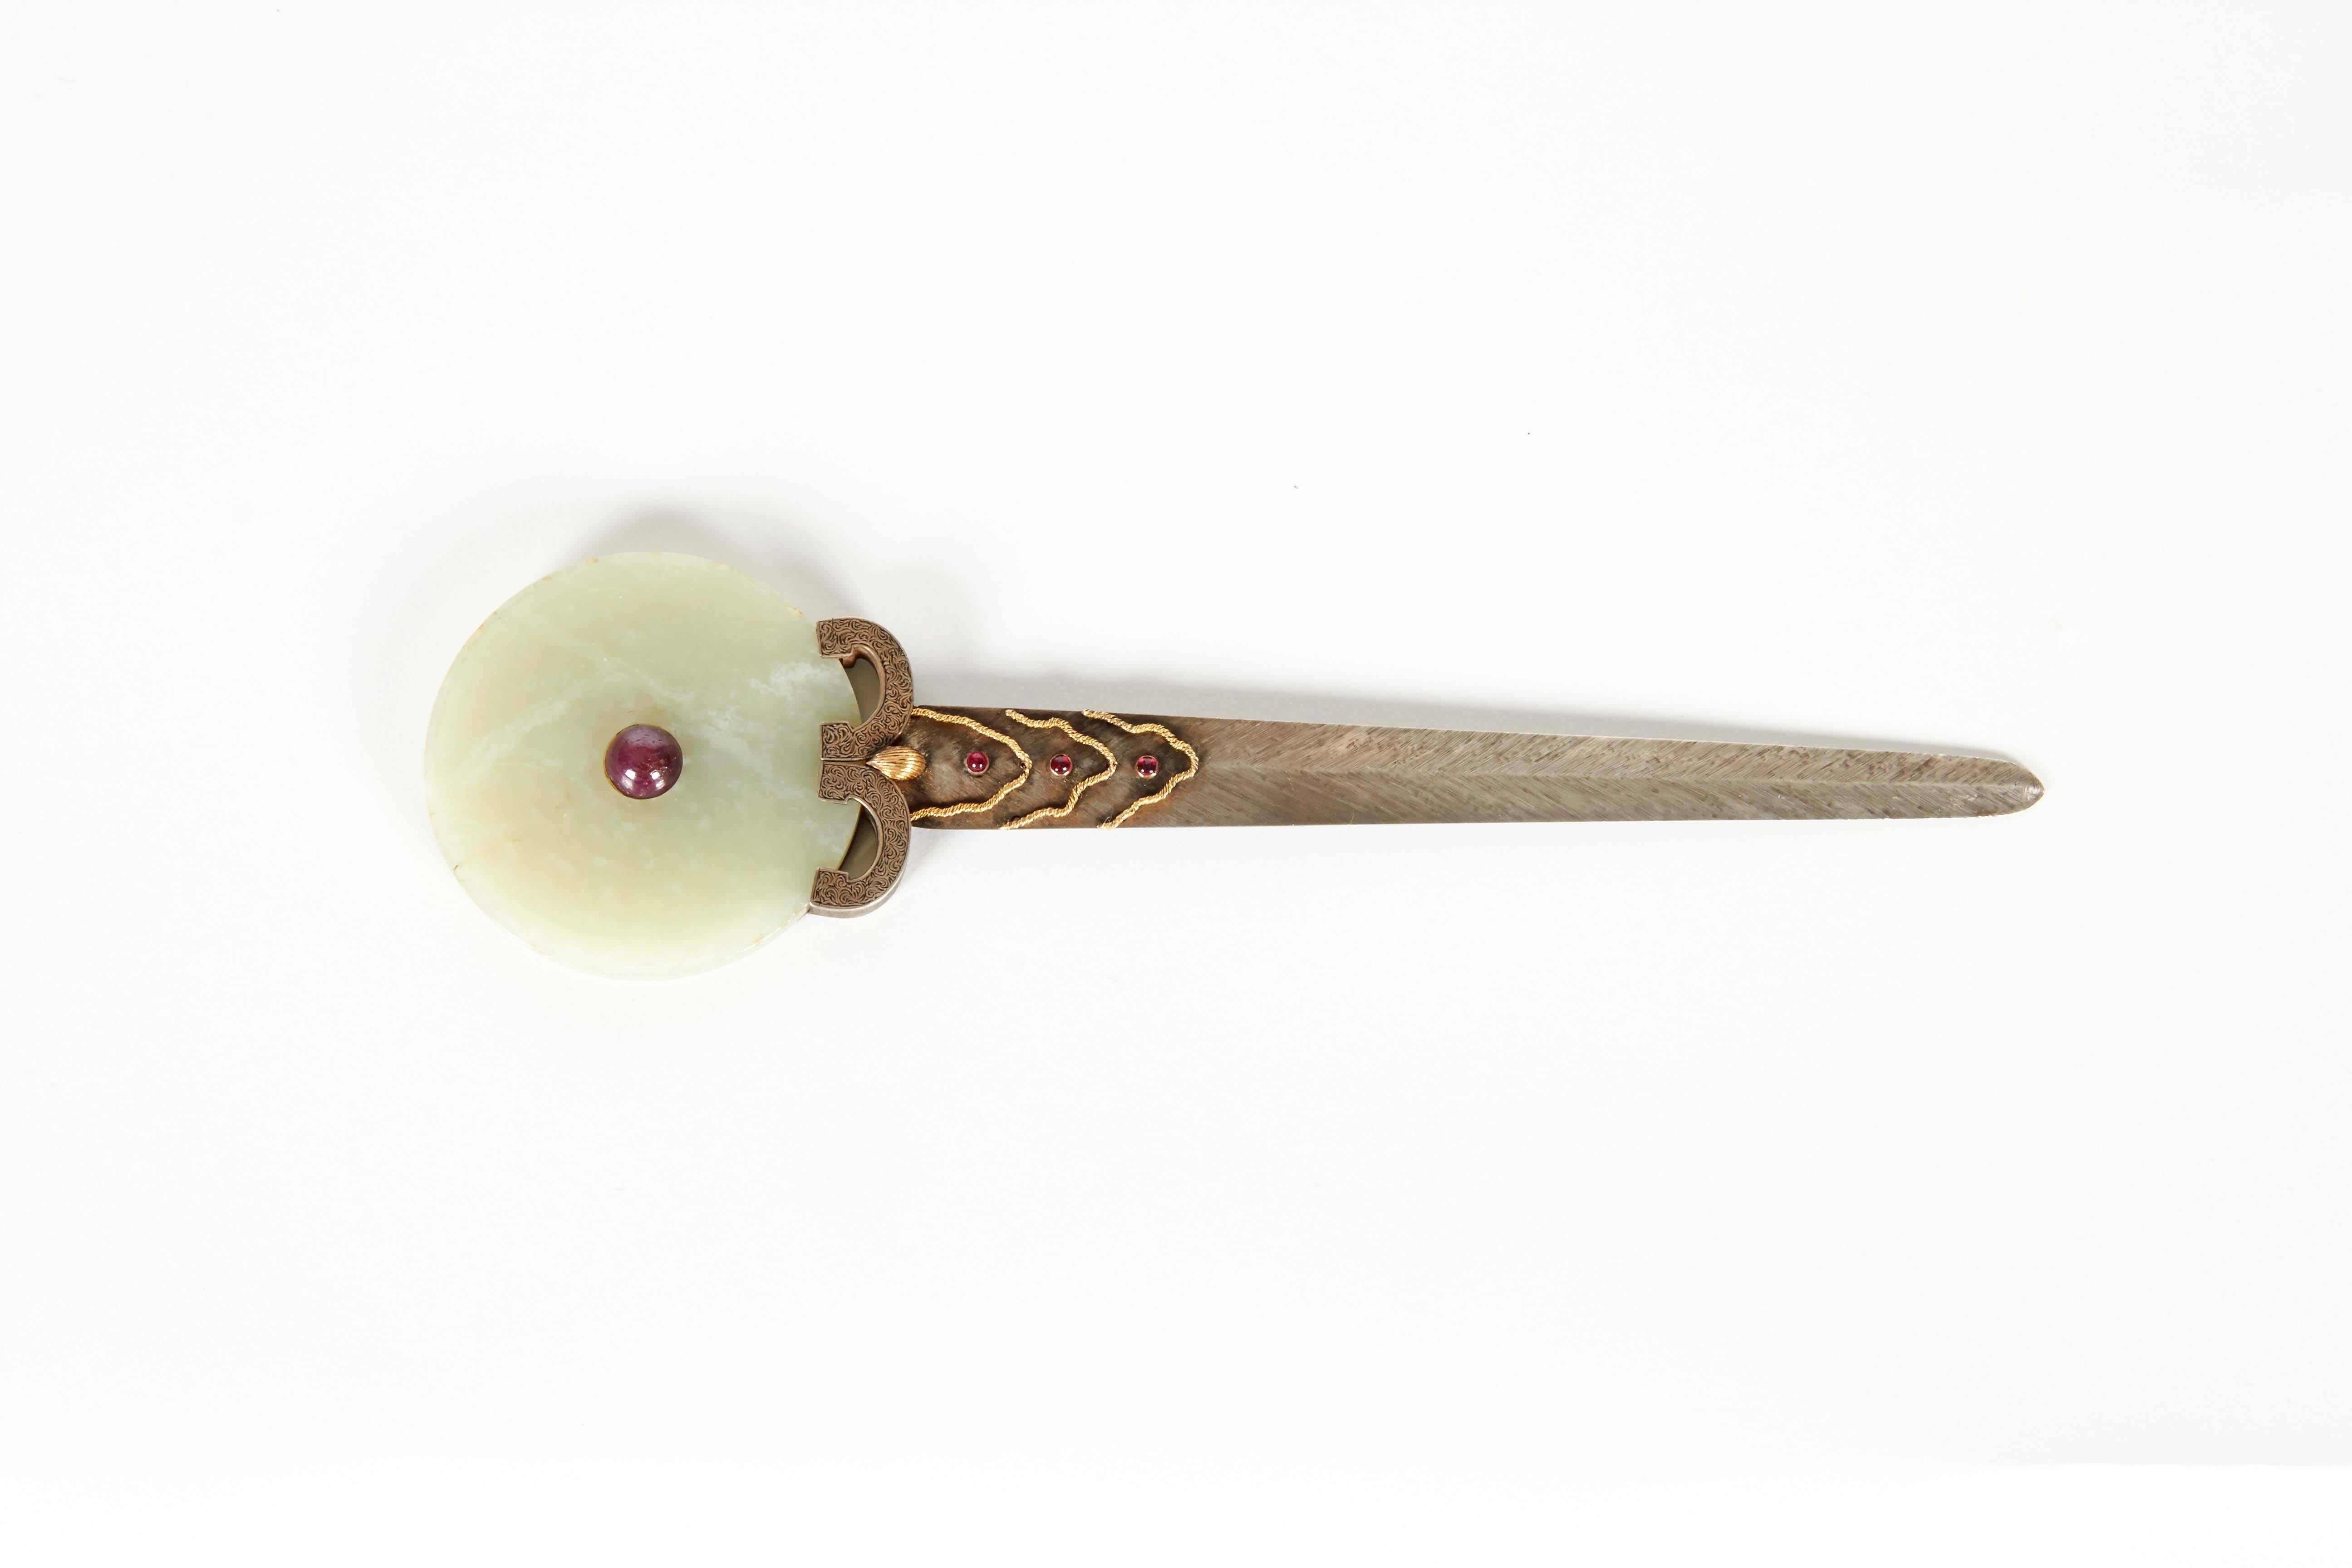 Italian silver and gold letter opener with Archaic Chinese Jade & Rubies.

Very fine quality object, possibly made by Buccelatti.

Made in the late 19th century.

Measures: 9